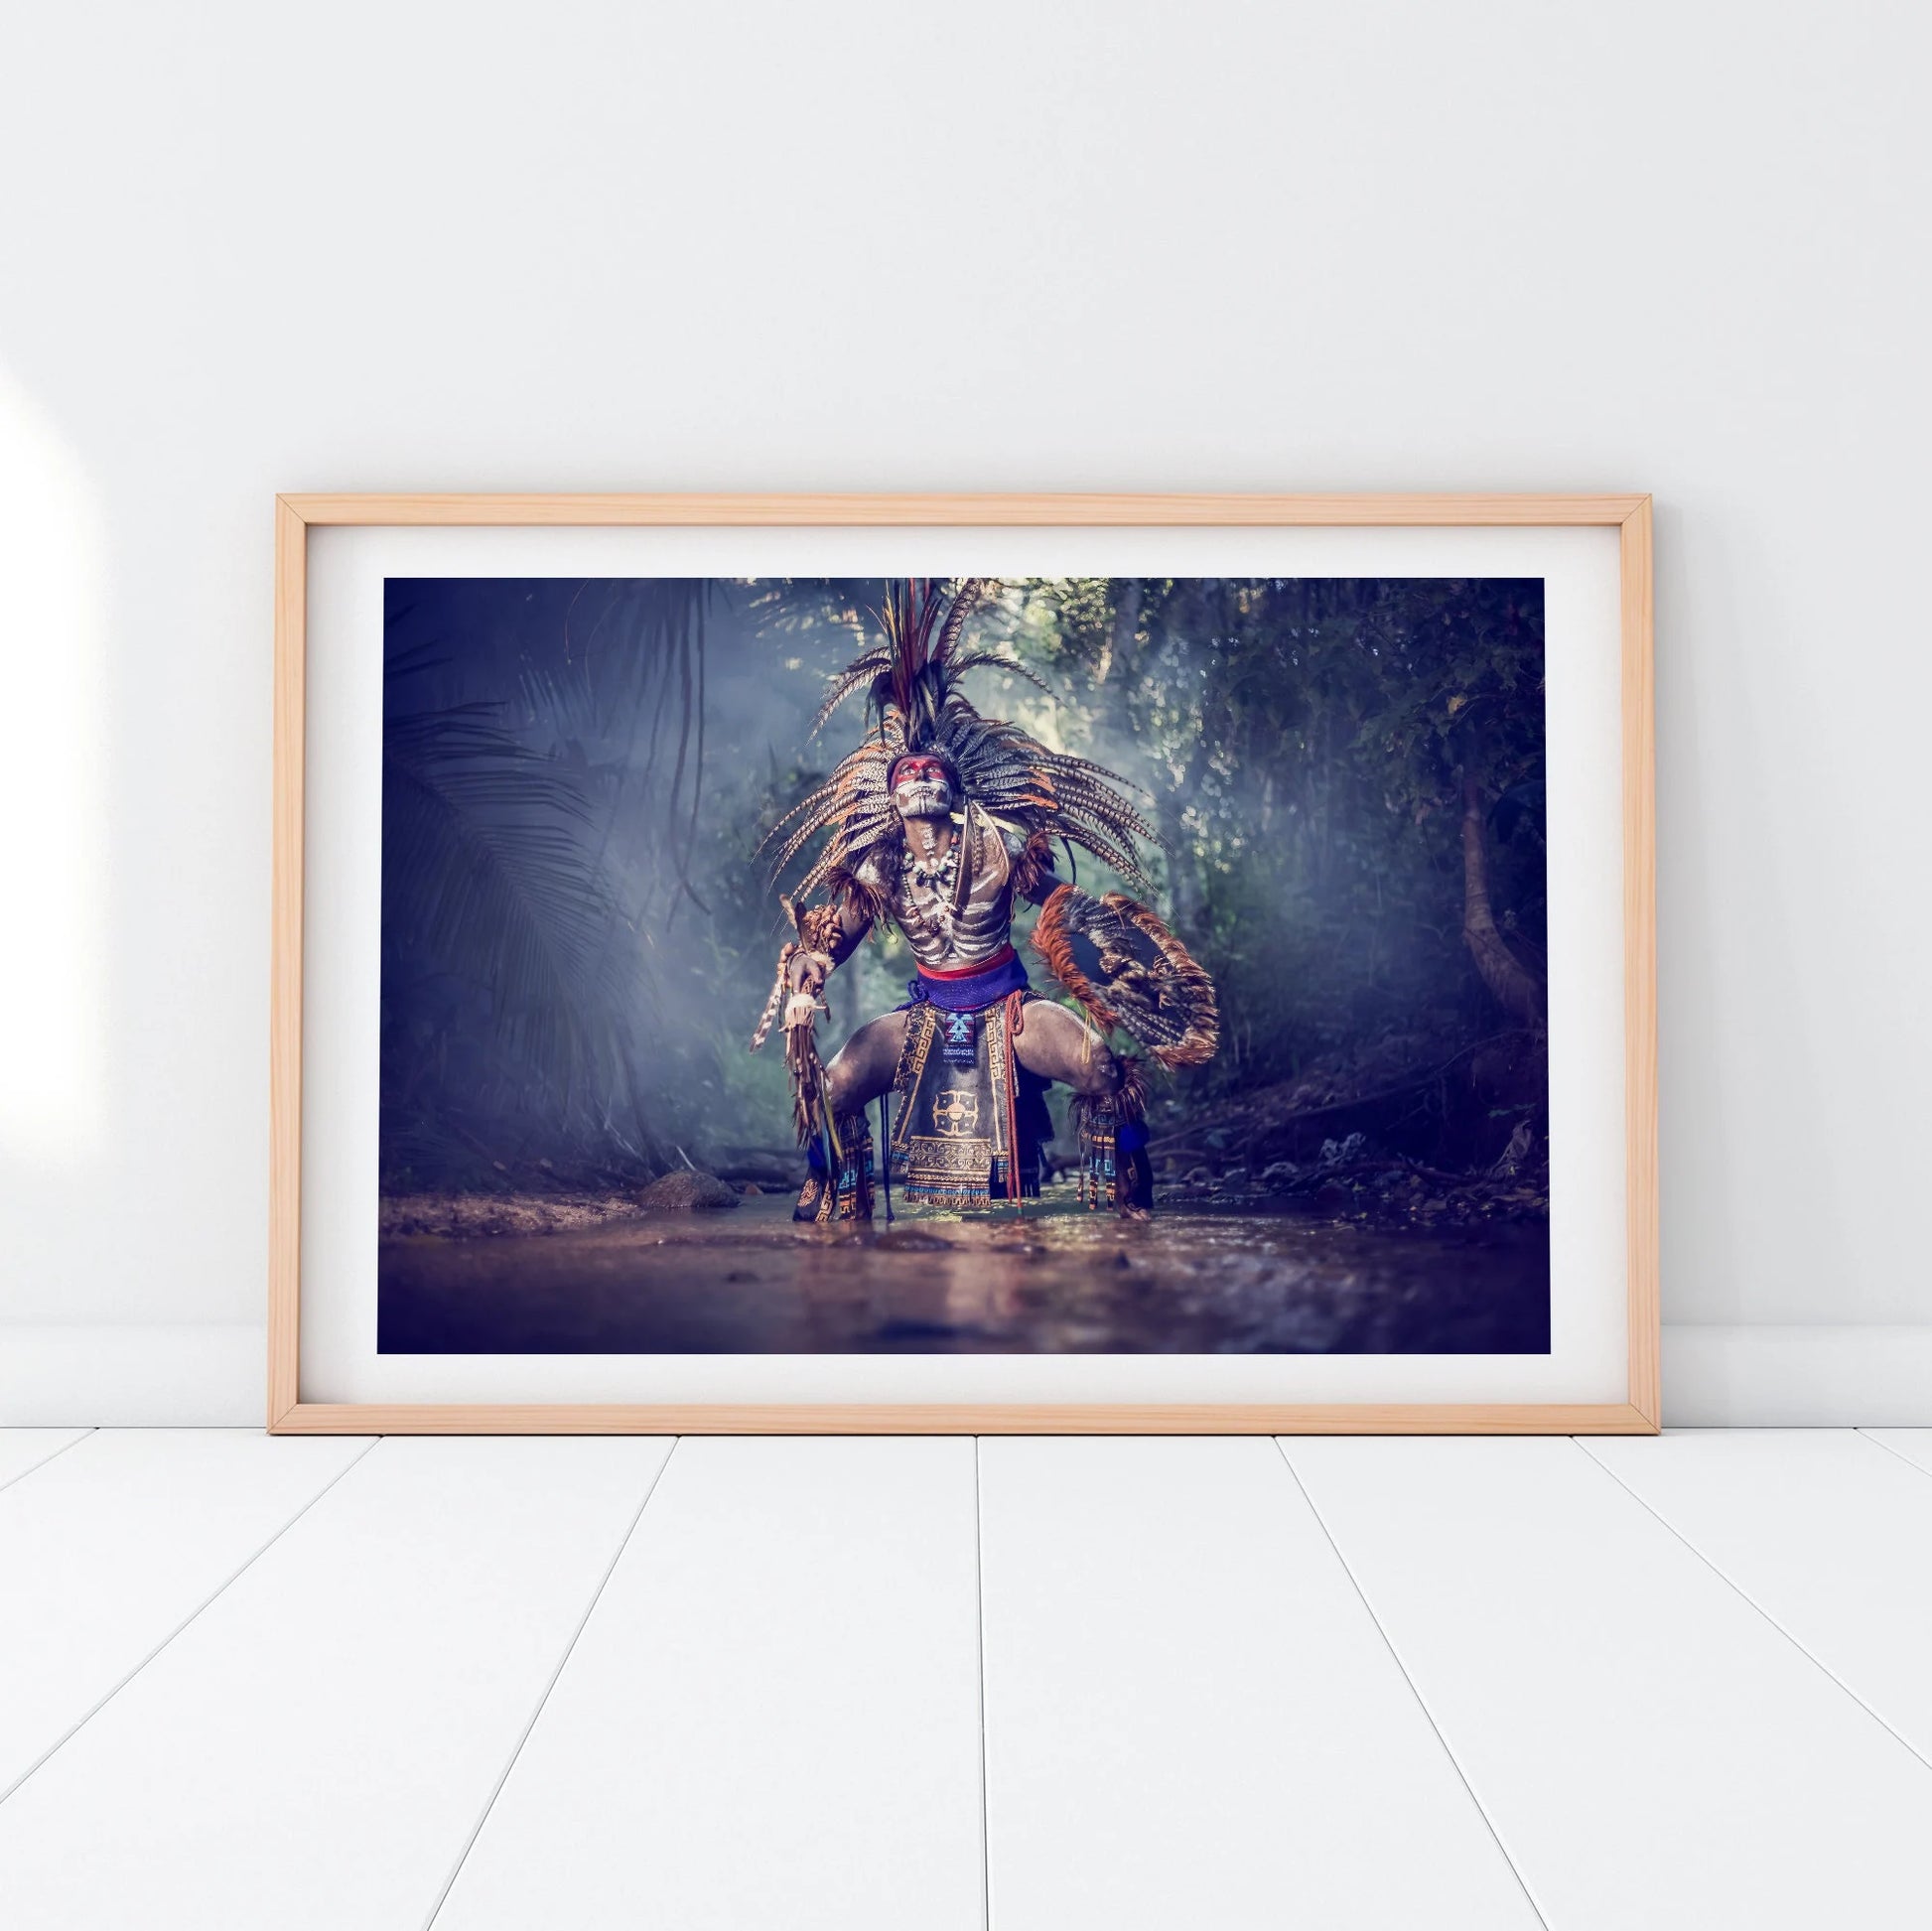 Aztec Warrior: Mexico's Captivating Fine Art Photography for Authentic Wall Decor